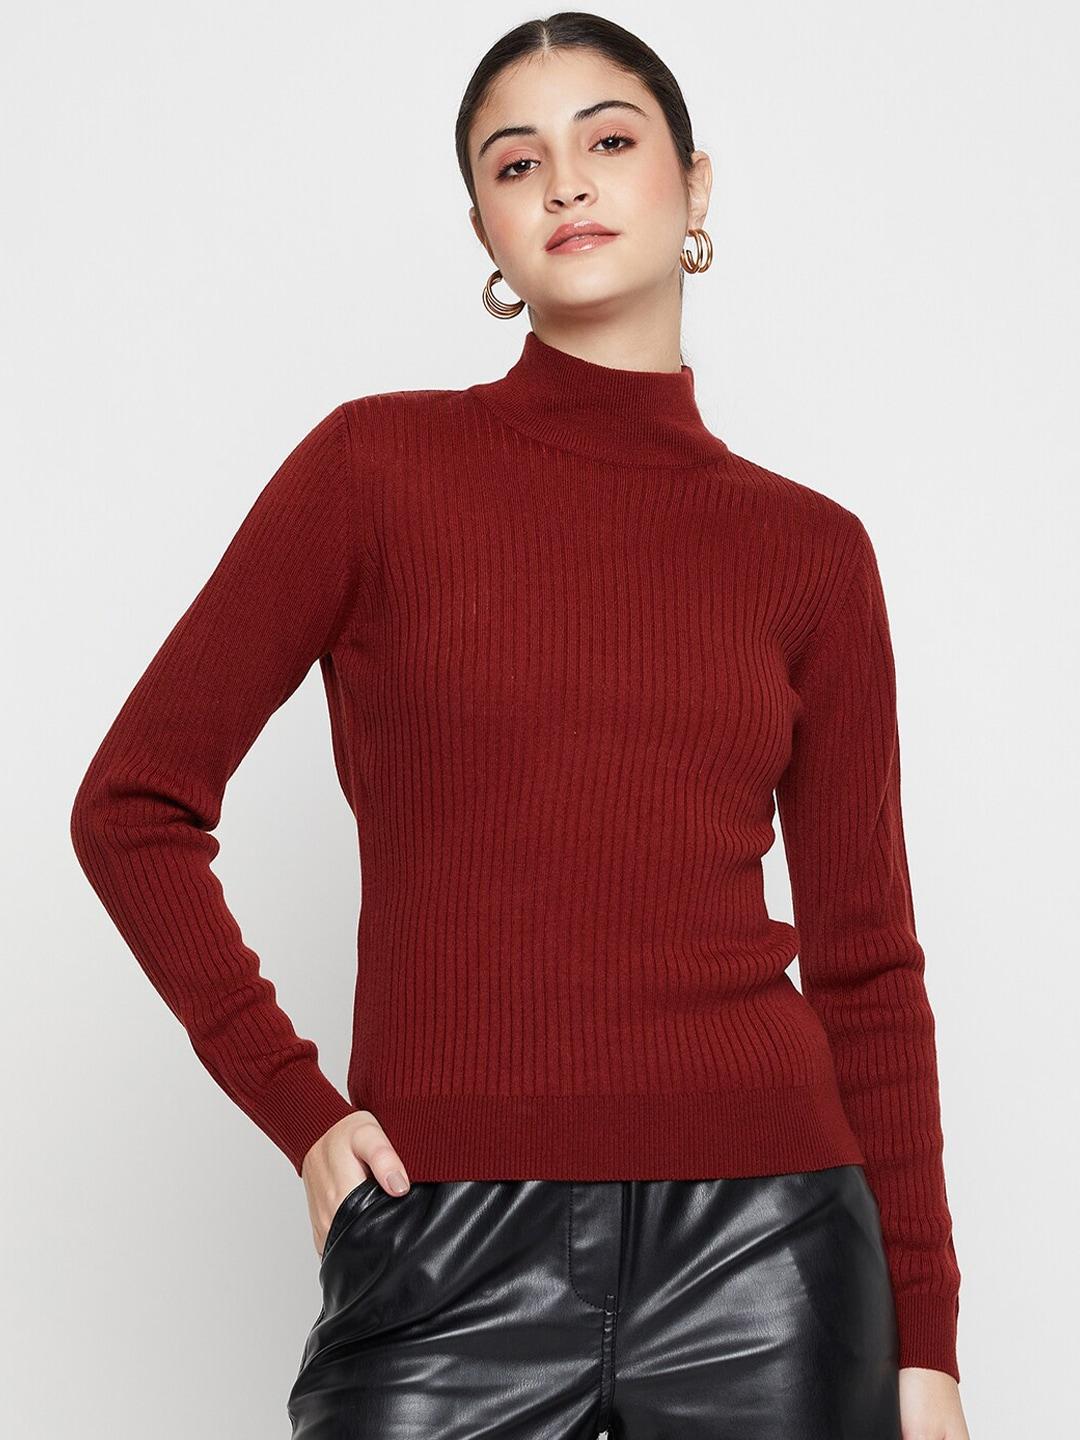 cantabil--turtle-neck-ribbed-acrylic-pullover-sweater